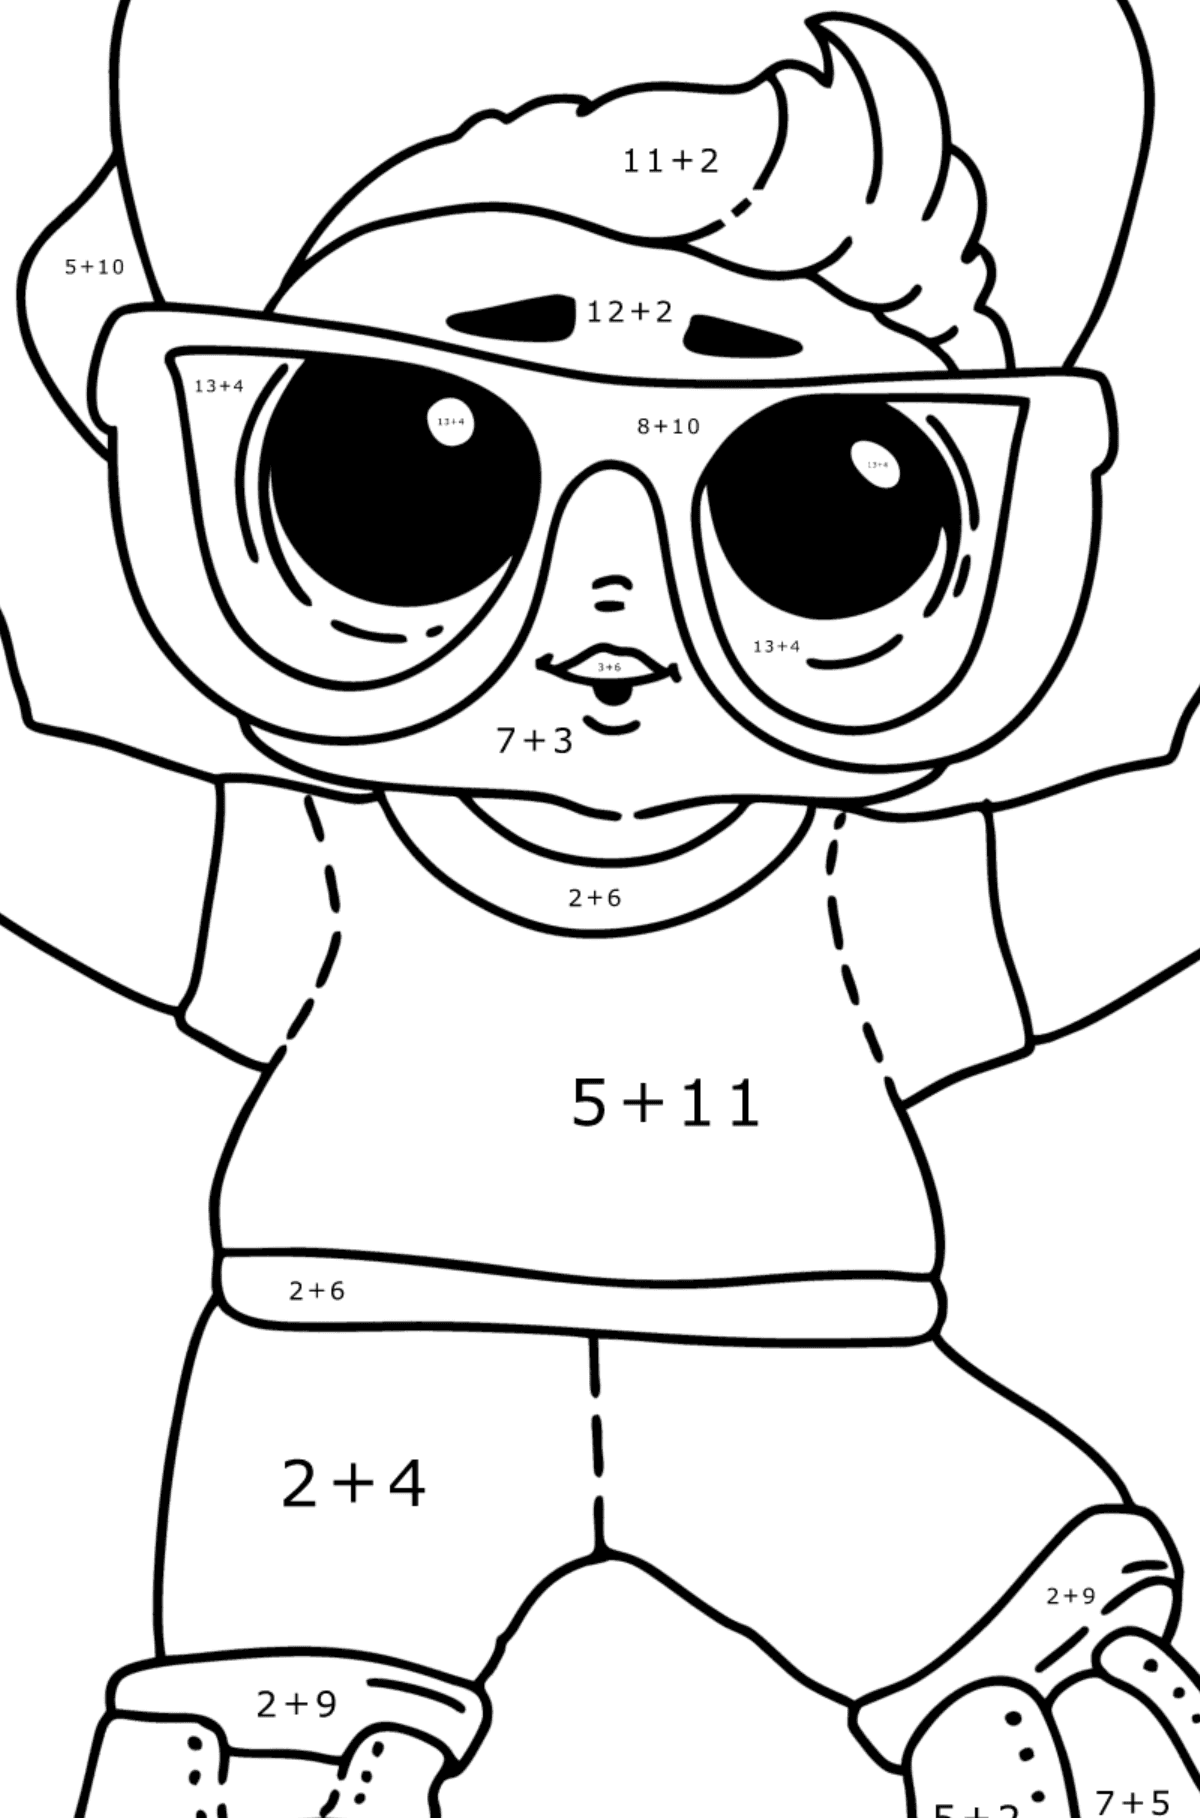 Coloring page LOL boy Next Door - Math Coloring - Addition for Kids